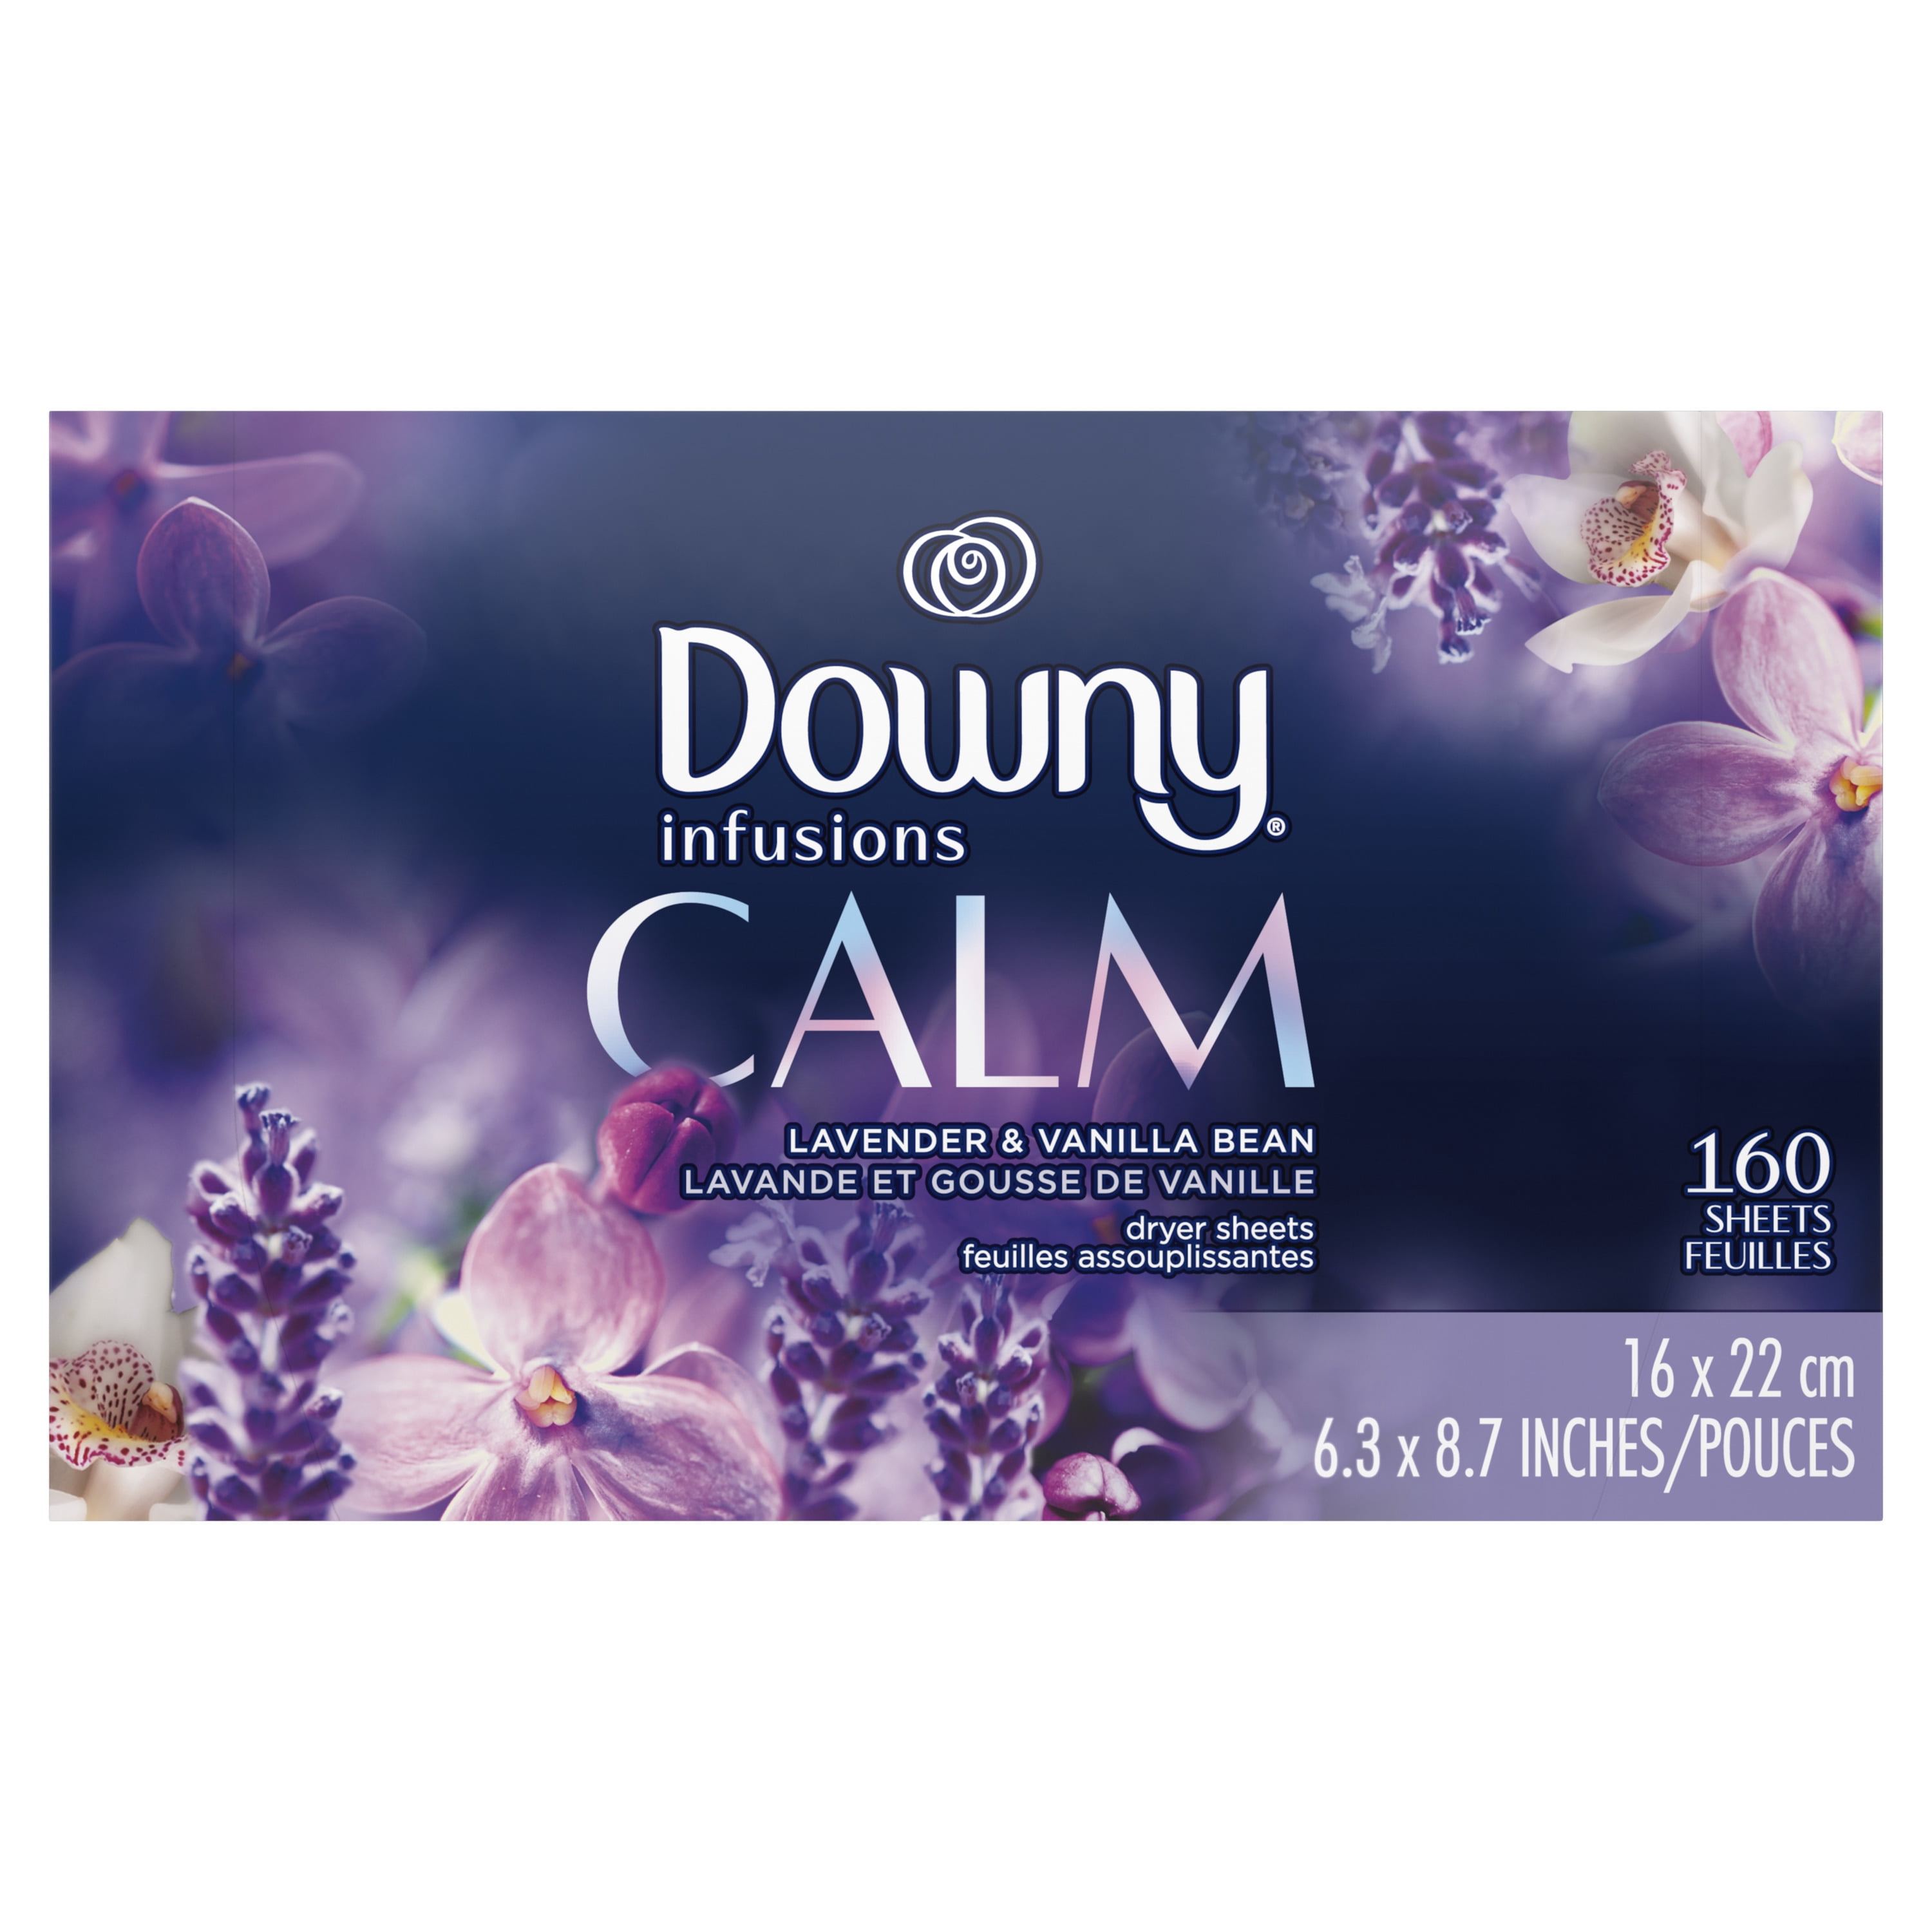 Downy Infusions Fabric Softener Dryer Sheets, Calm, Lavender & Vanilla Bean, 160 Ct